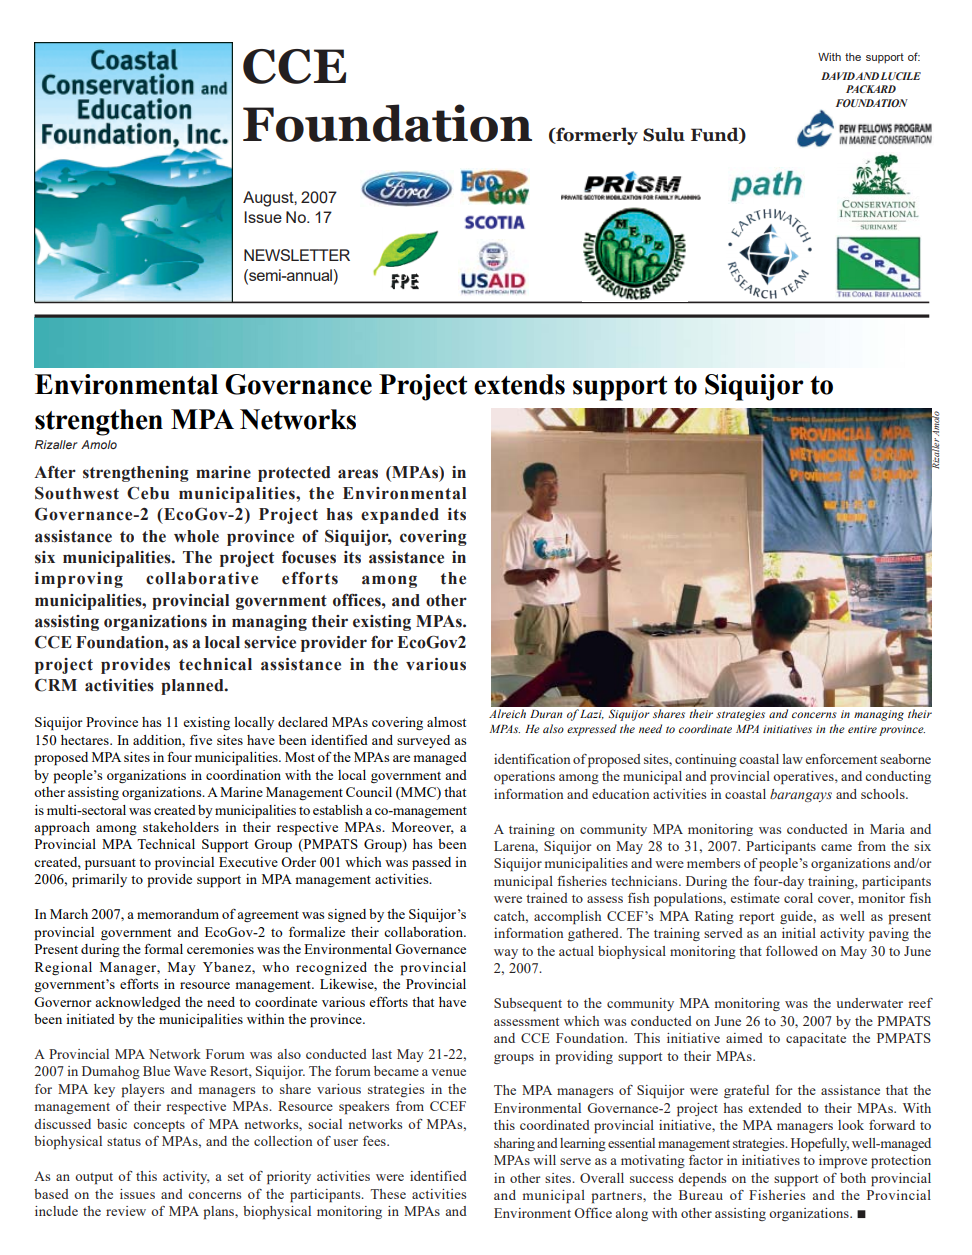 ENVIRONMENTAL GOVERNANCE PROJECT EXTENDS SUPPORT TO SIQUIJOR TO STRENGTHEN MPA NETWORKS